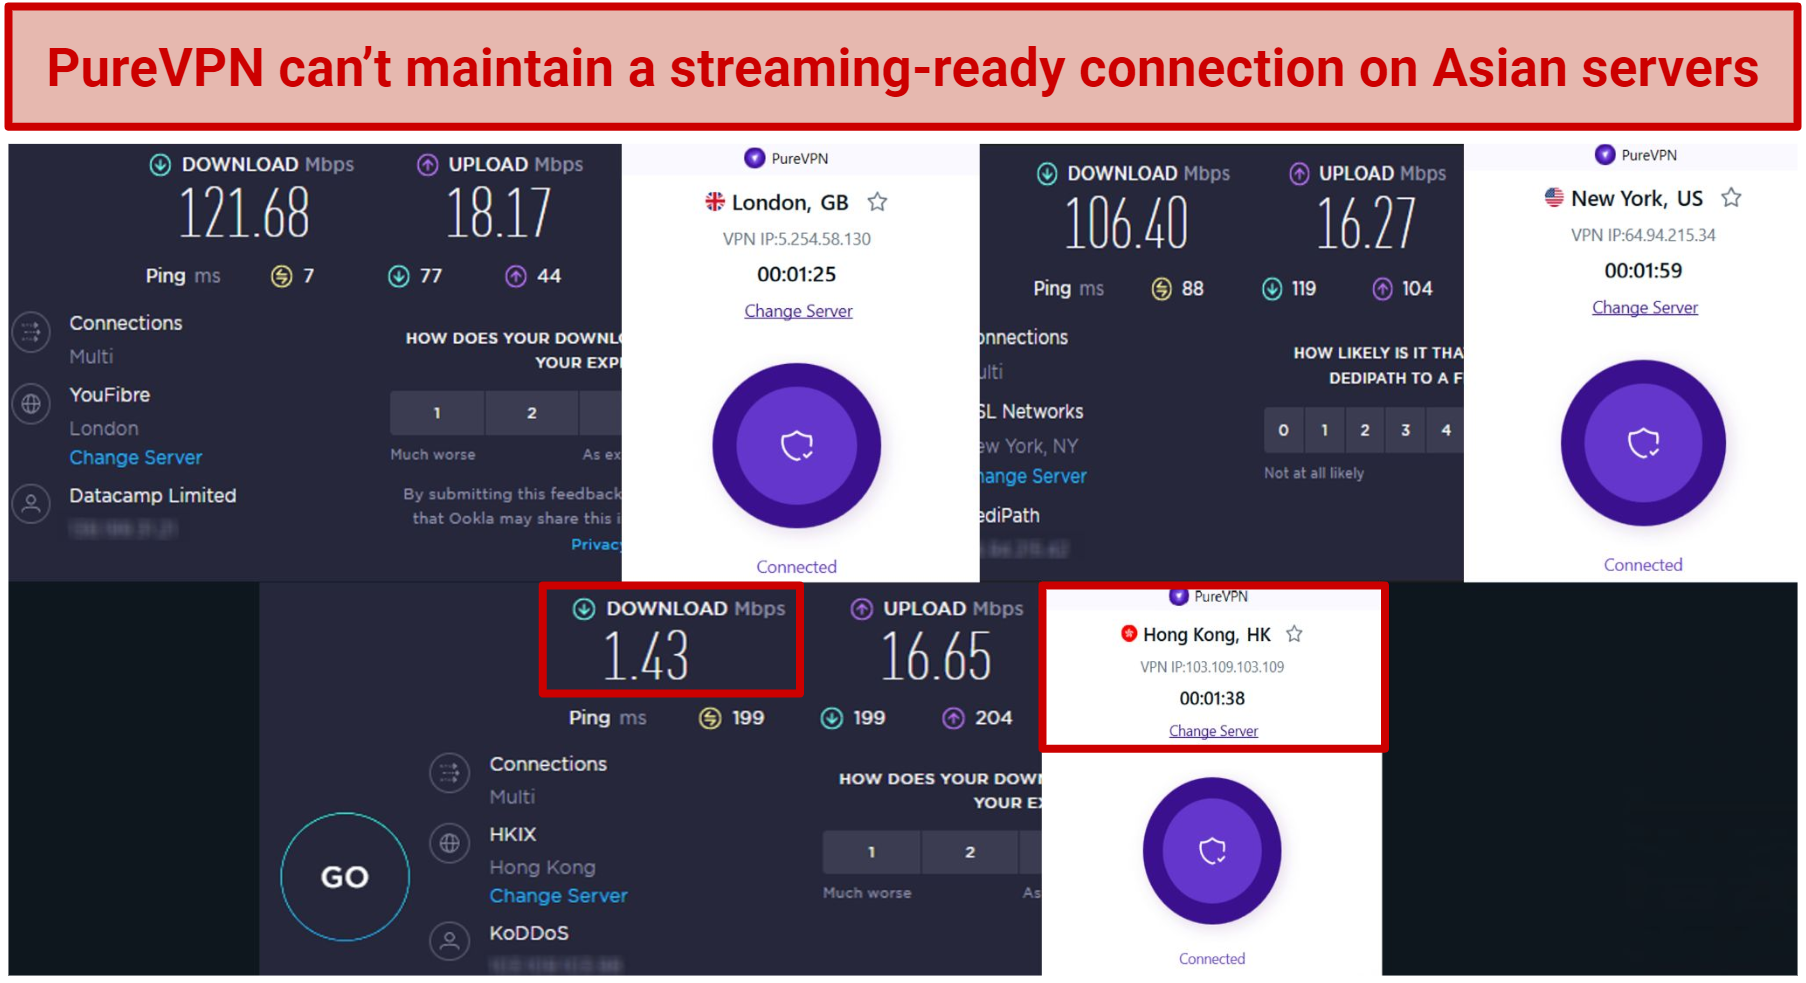 Pictures of PureVPN speed tested on servers in New York, London, and Hong Kong